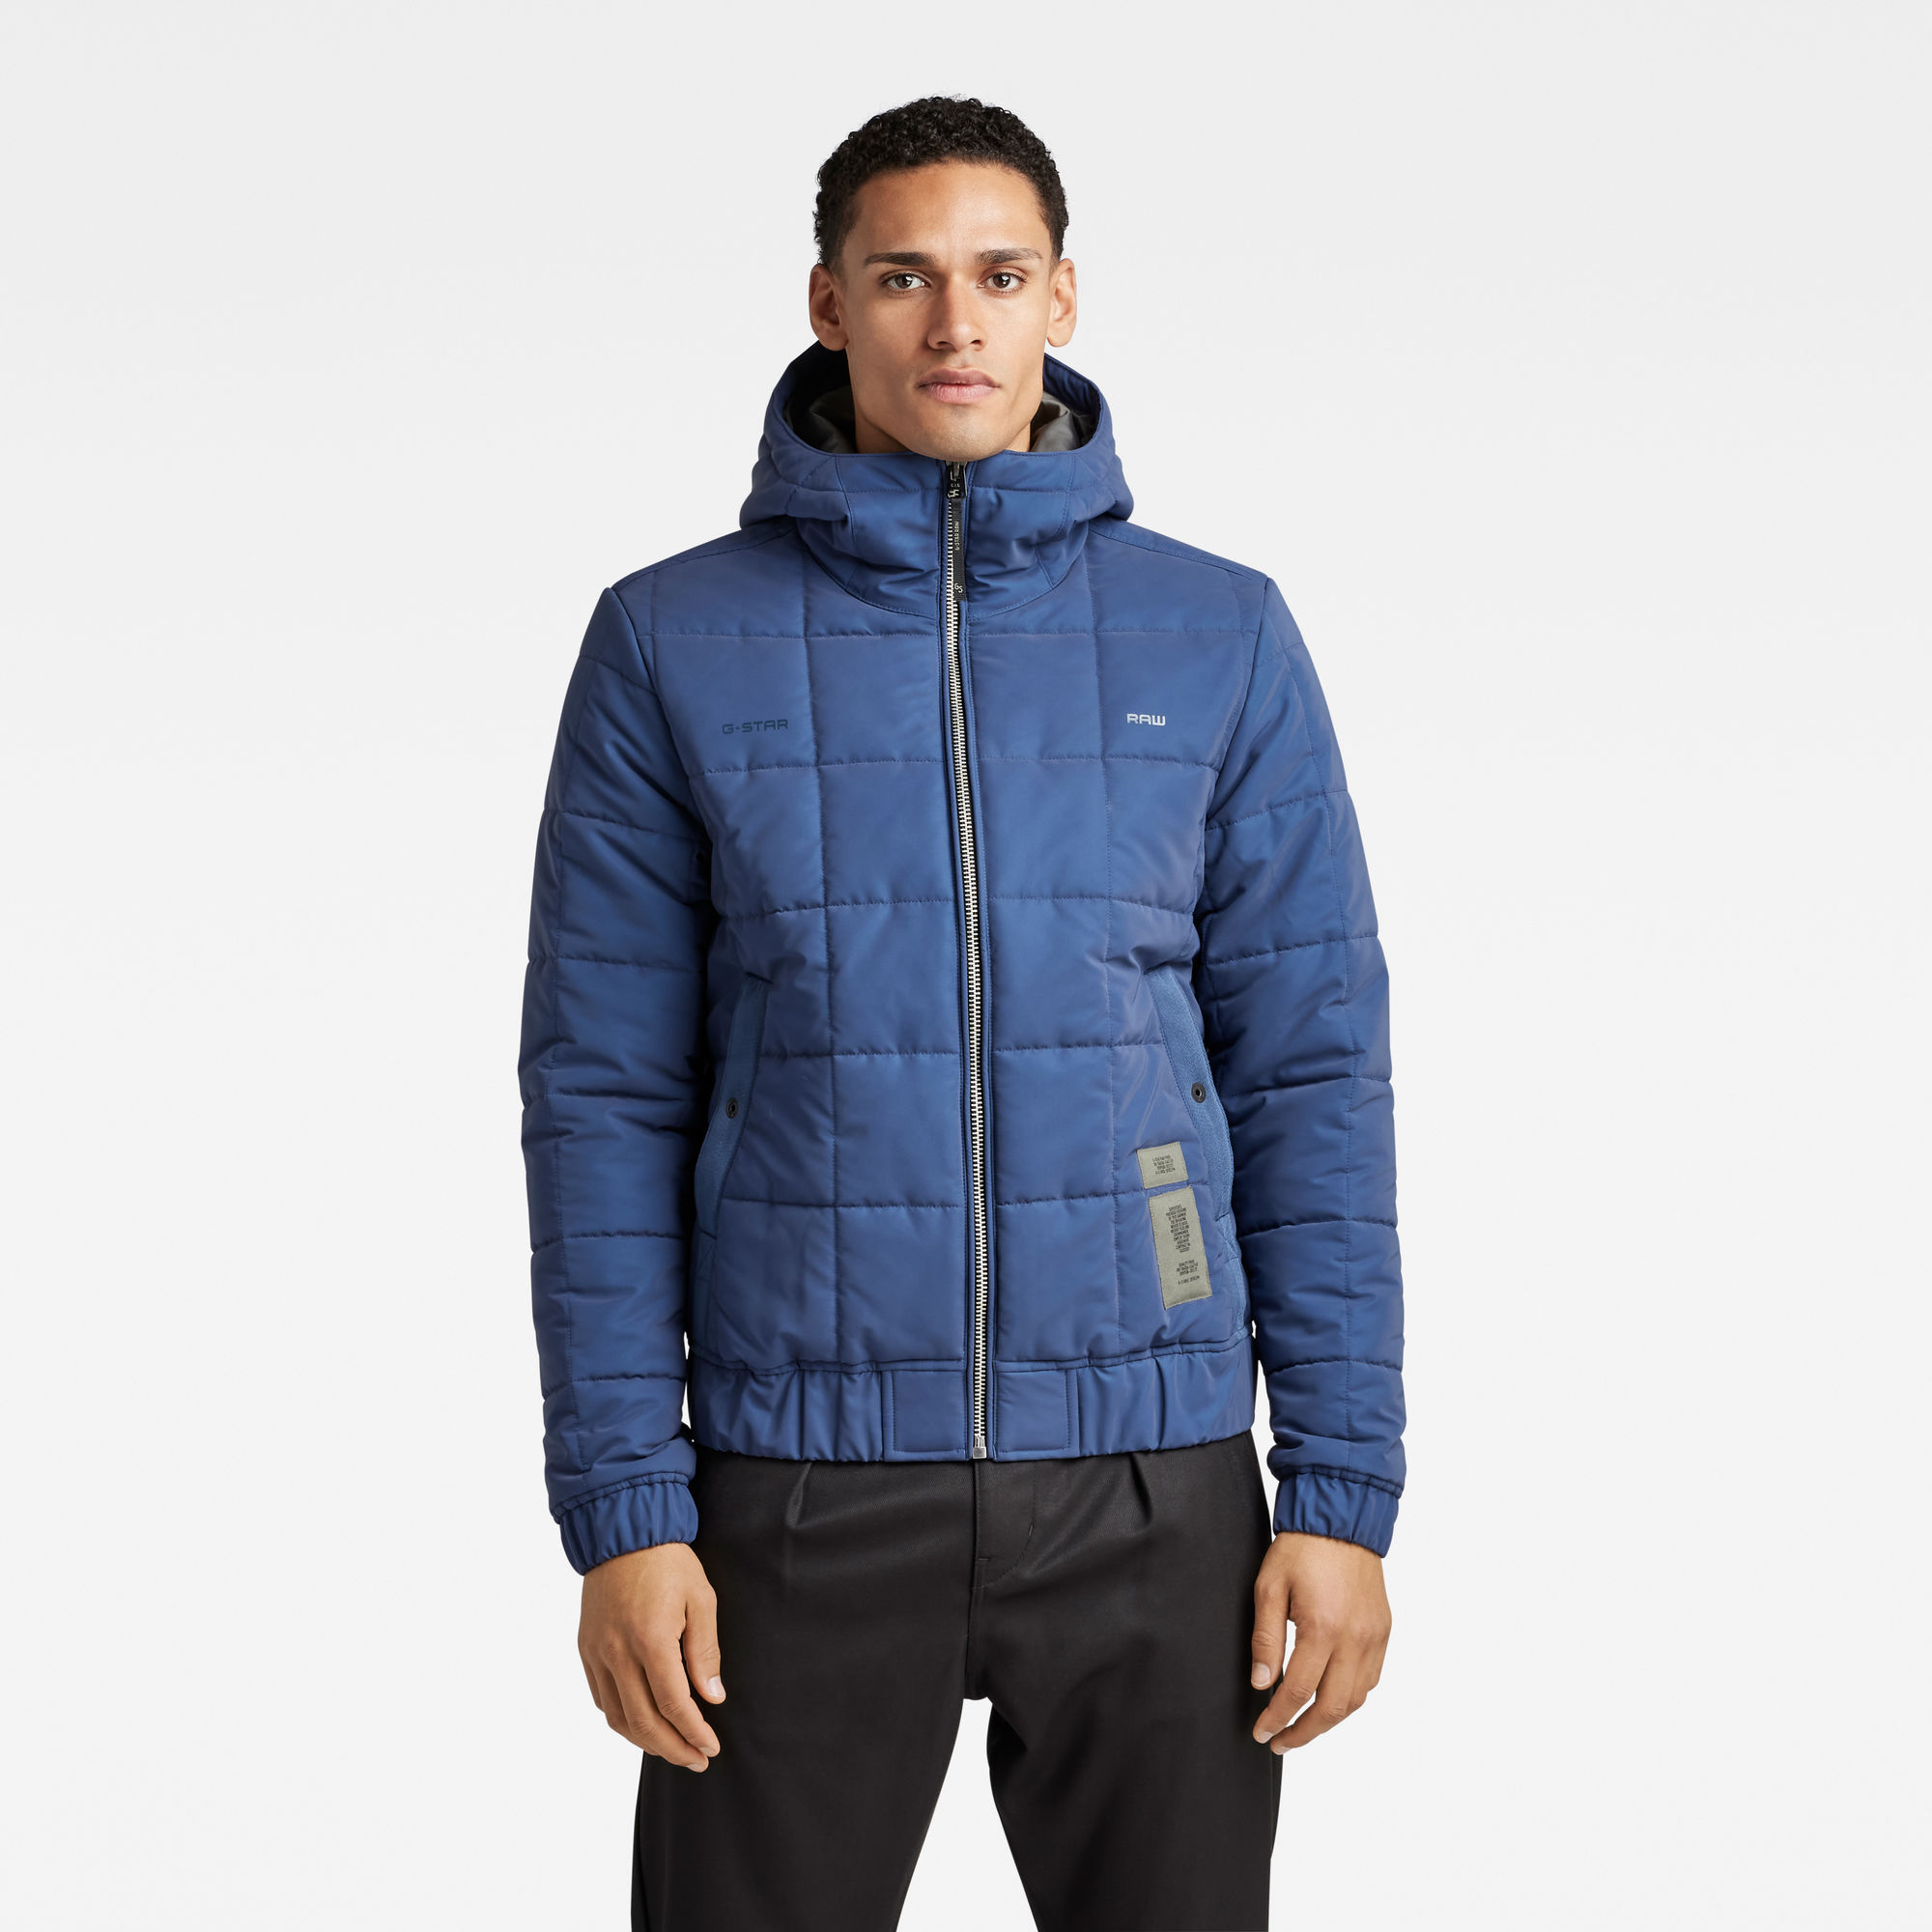 

Meefic Squared Quilted Hooded Jacket - Medium blue - Men